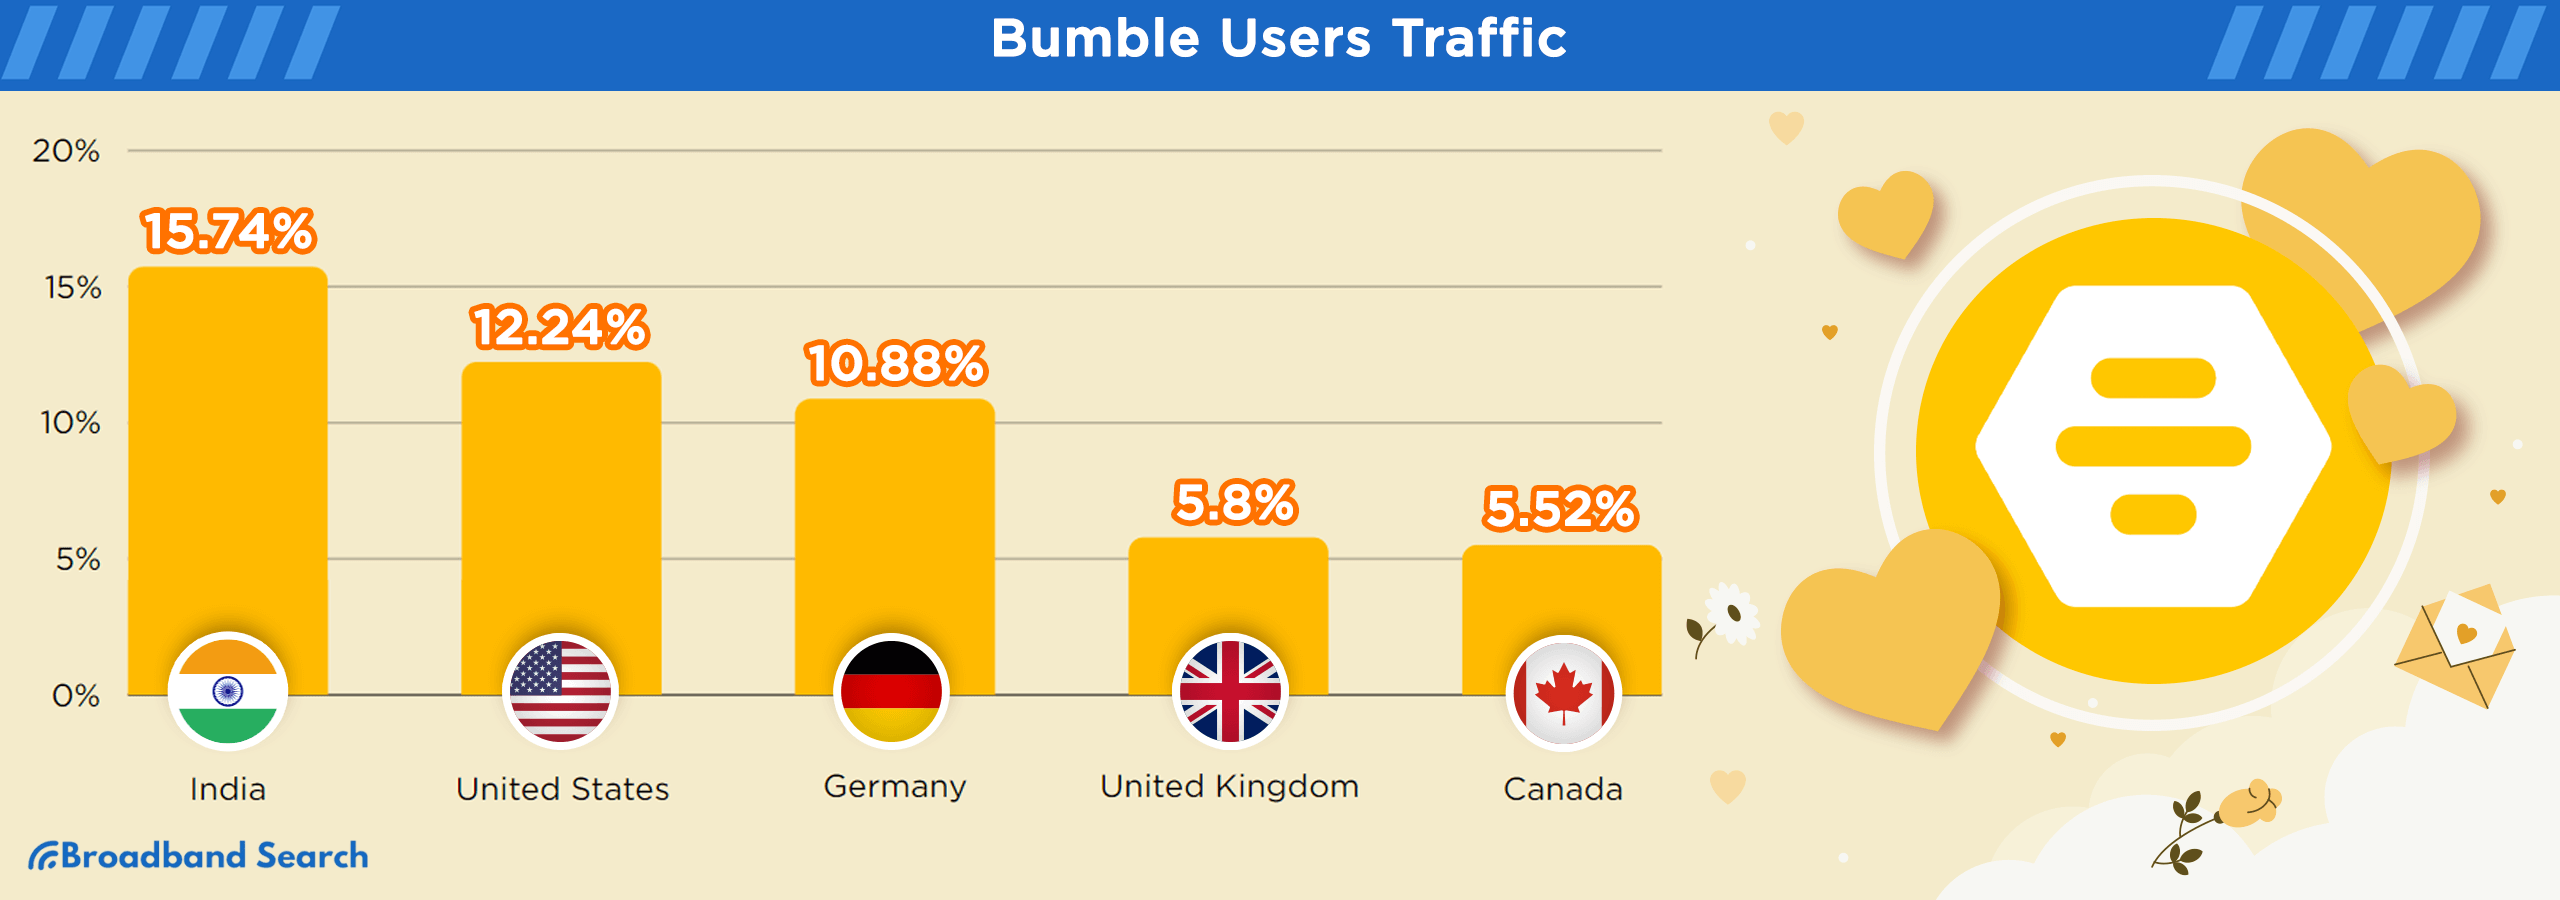 Bumble's global user traffic distribution by country